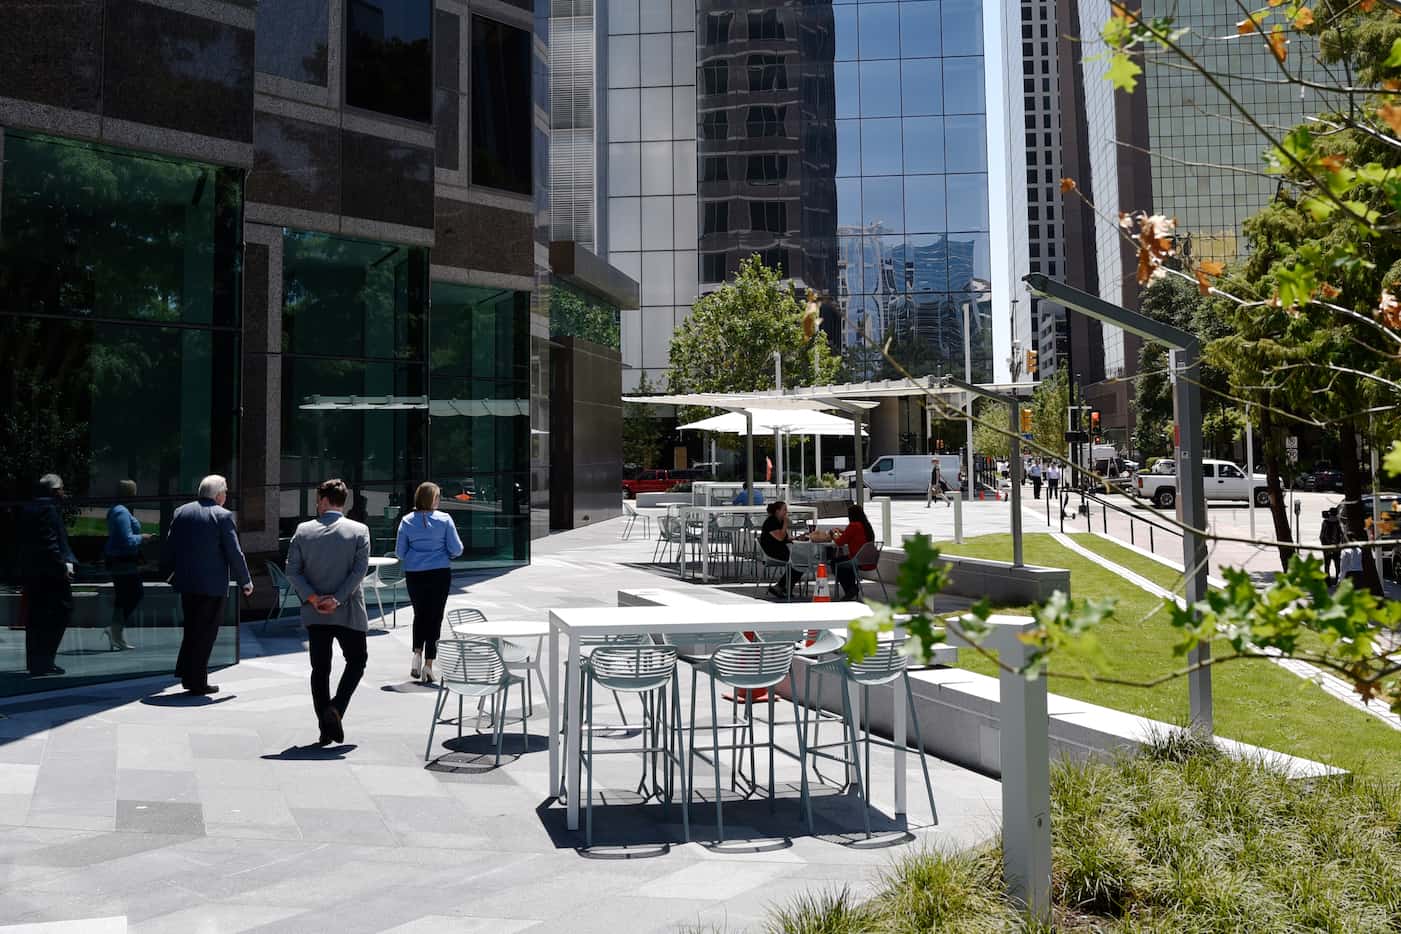 Outside eating and lounge space at the newly updated Trammell Crow Center in downtown Dallas.